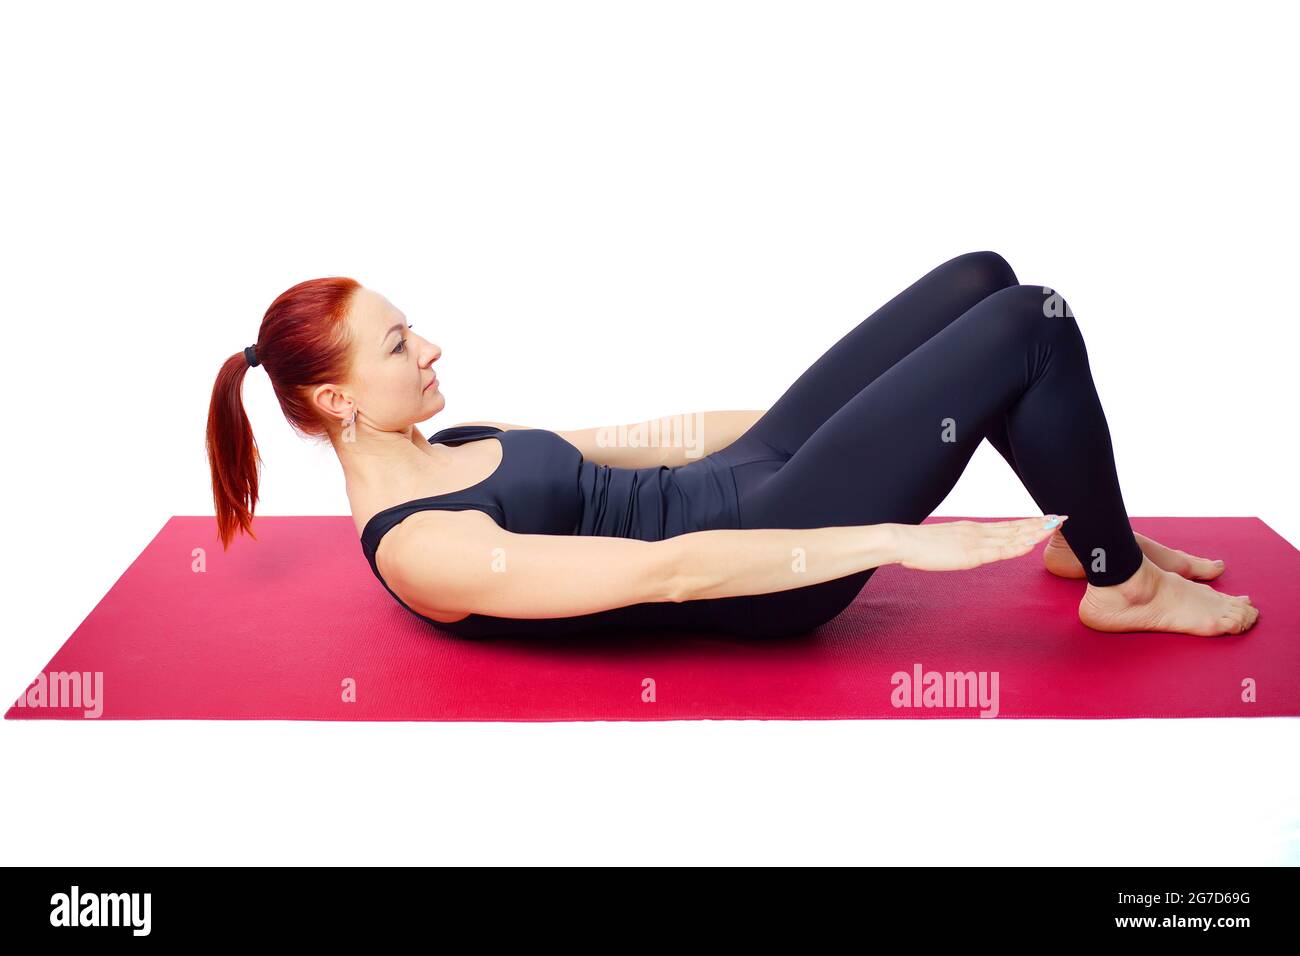 A beautiful slender woman performs an exercise to develop the strength of the abdominal muscles on a gym mat. Diaphragm breathing. Isolated on a white background. Stock Photo